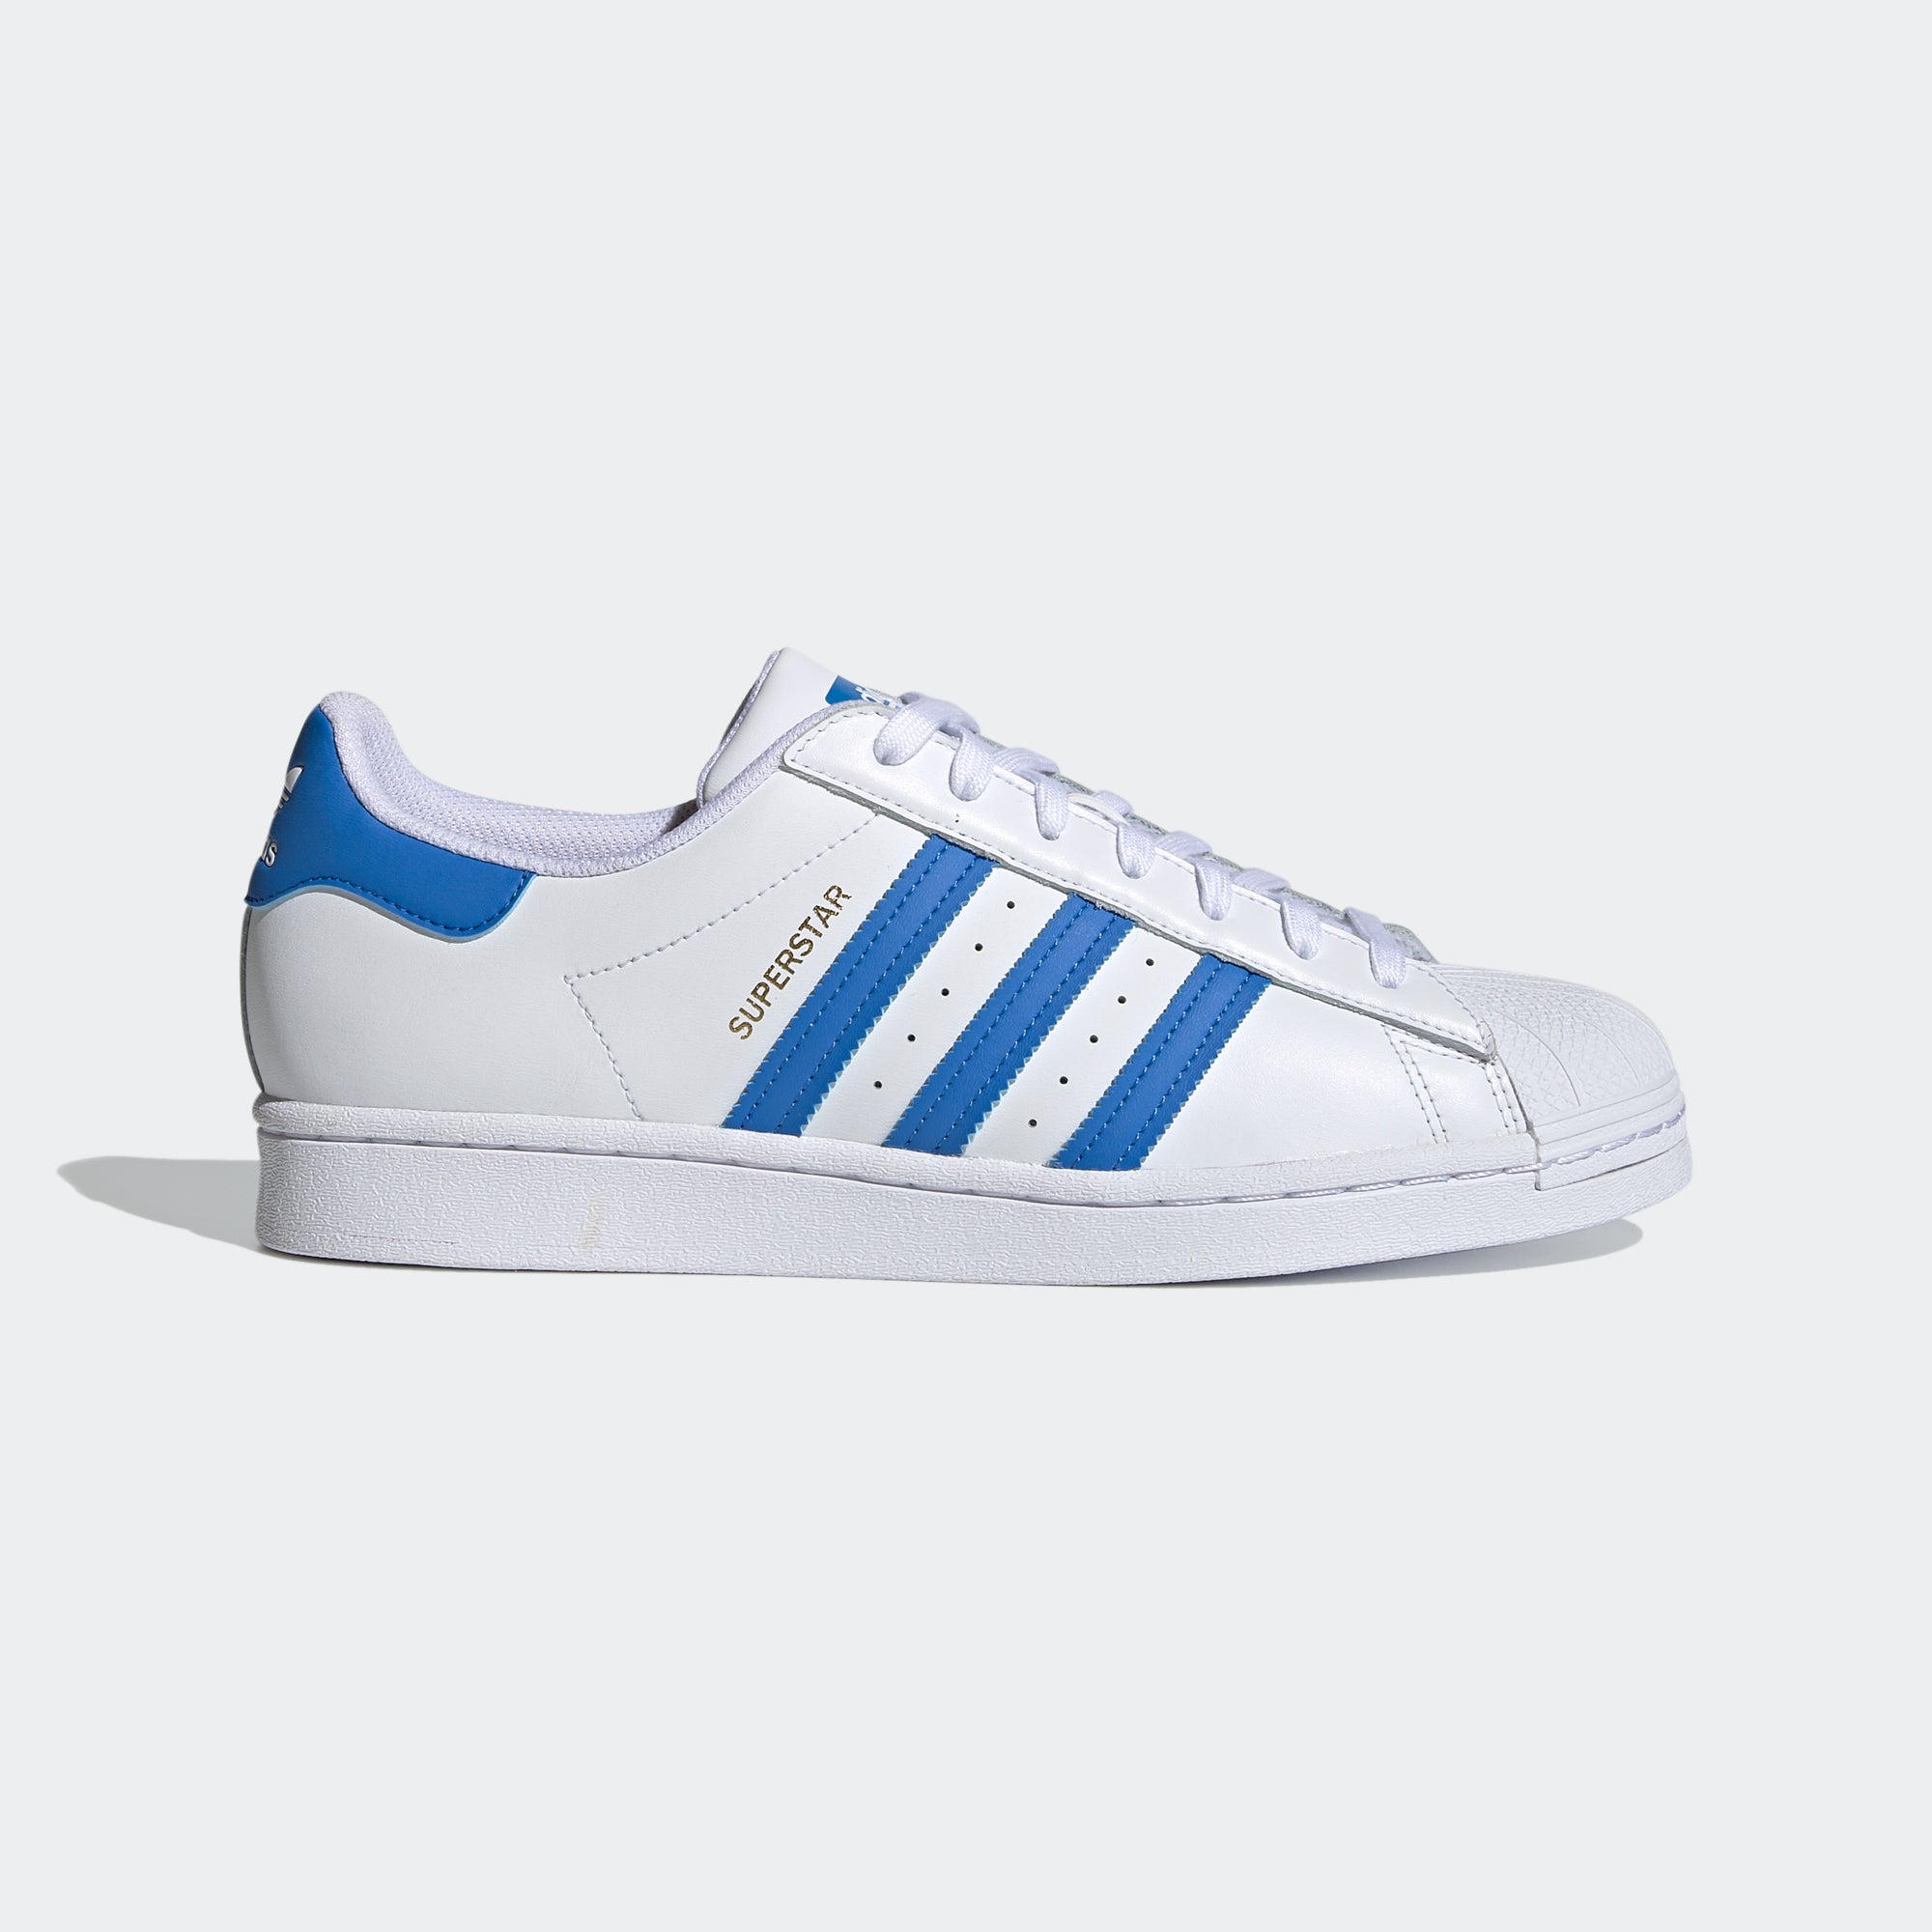 blue adidas high top sneakers